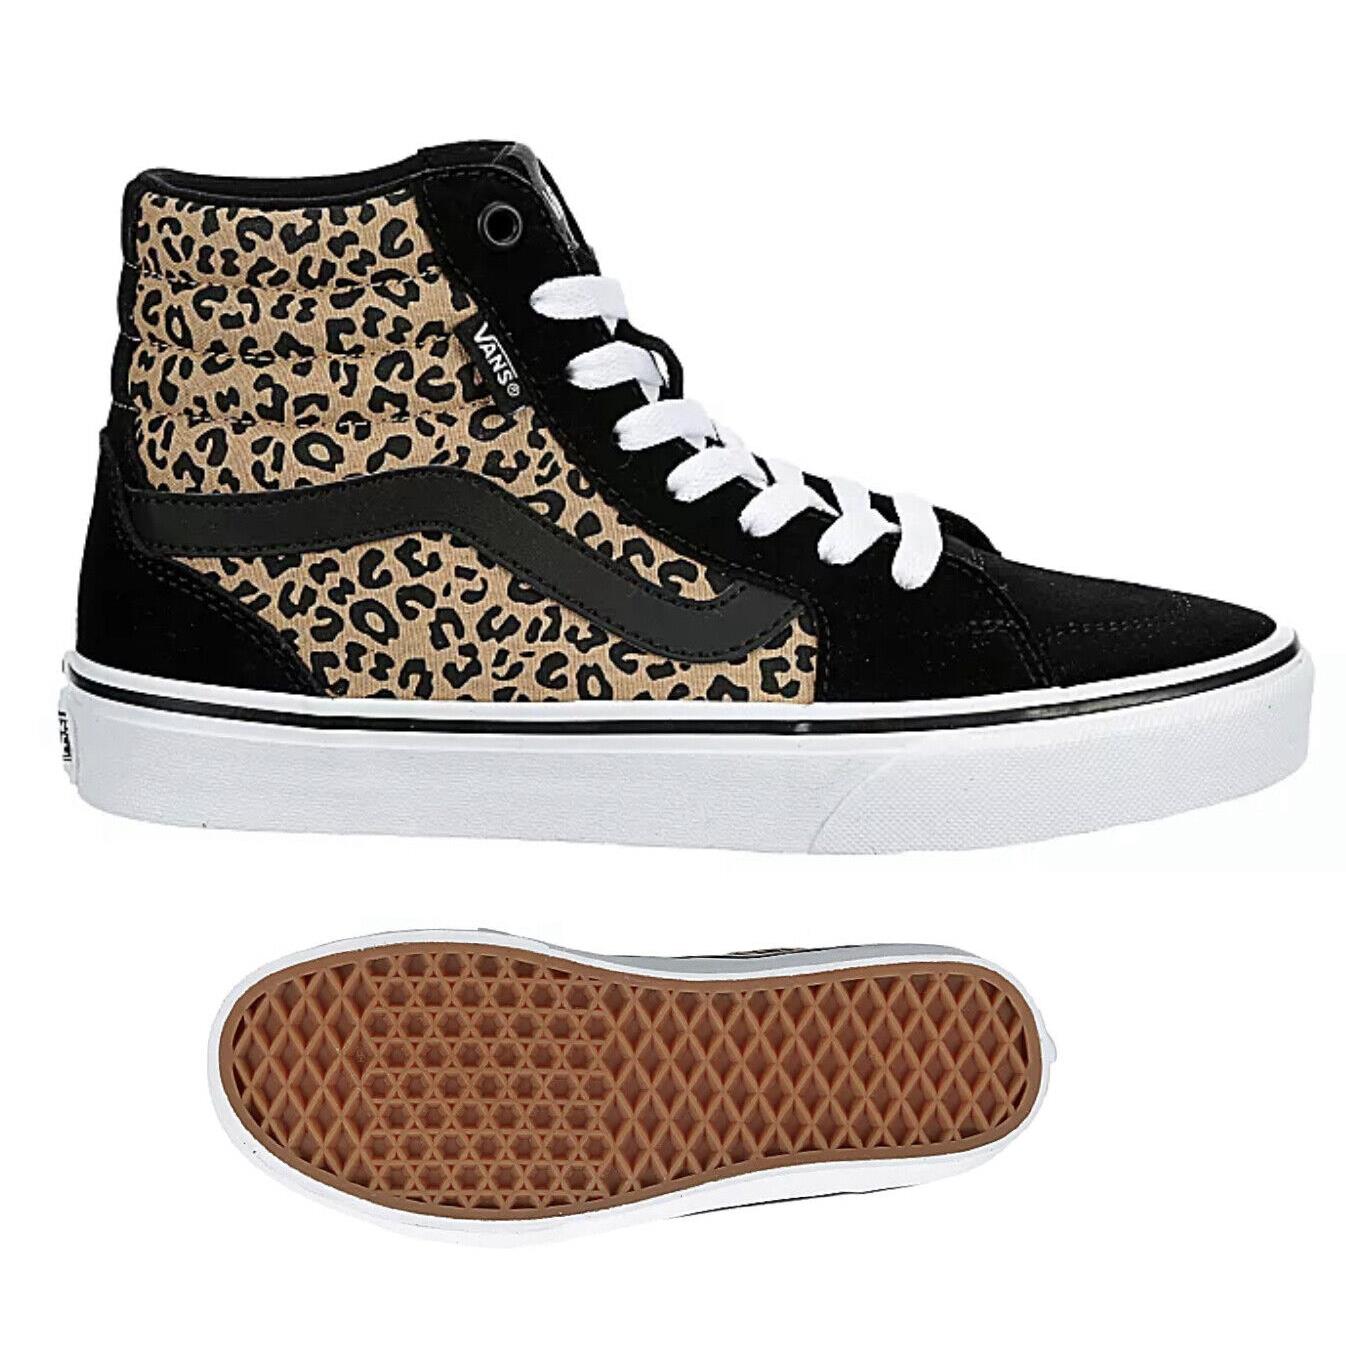 Vans Leopard Hi Top Casual Womens Sneakers Shoes Black Brown All Sizes